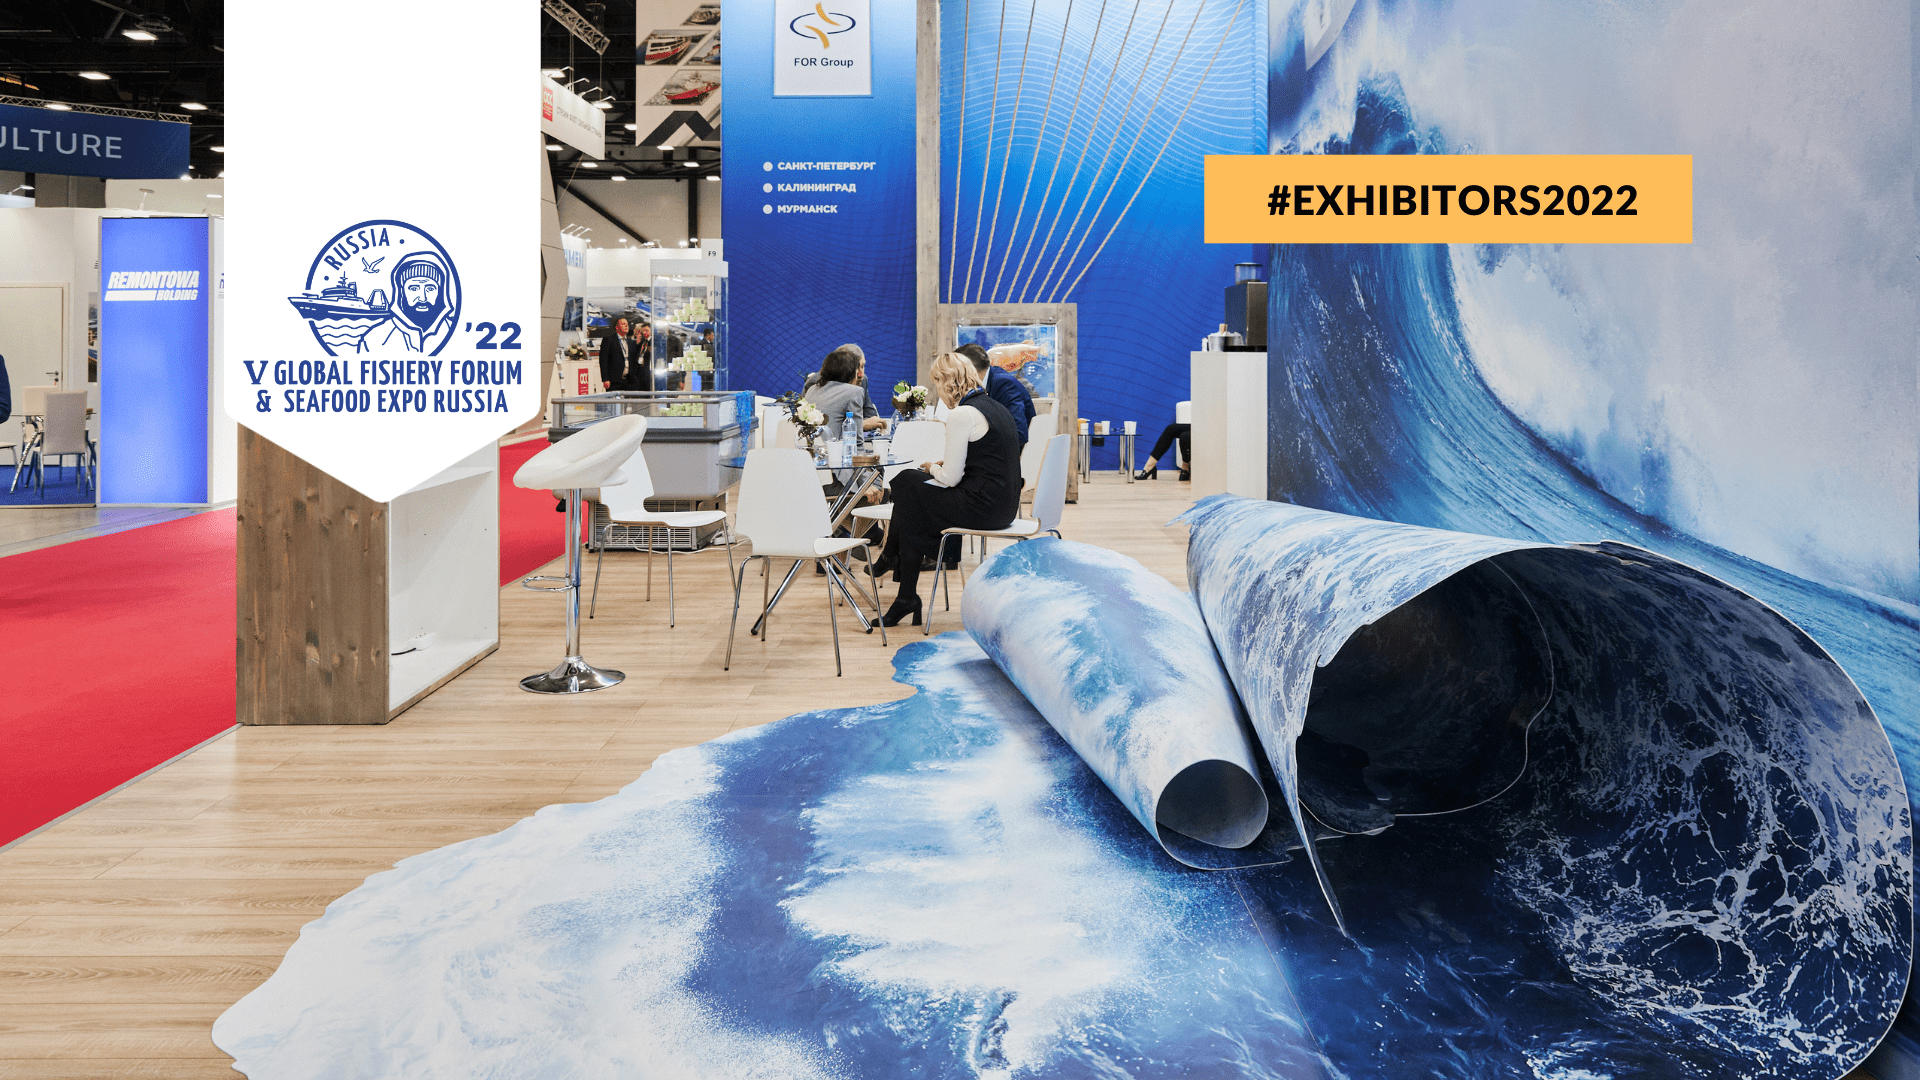 Seafood Expo Russia 2022: Overview of New Exhibitors No. 11